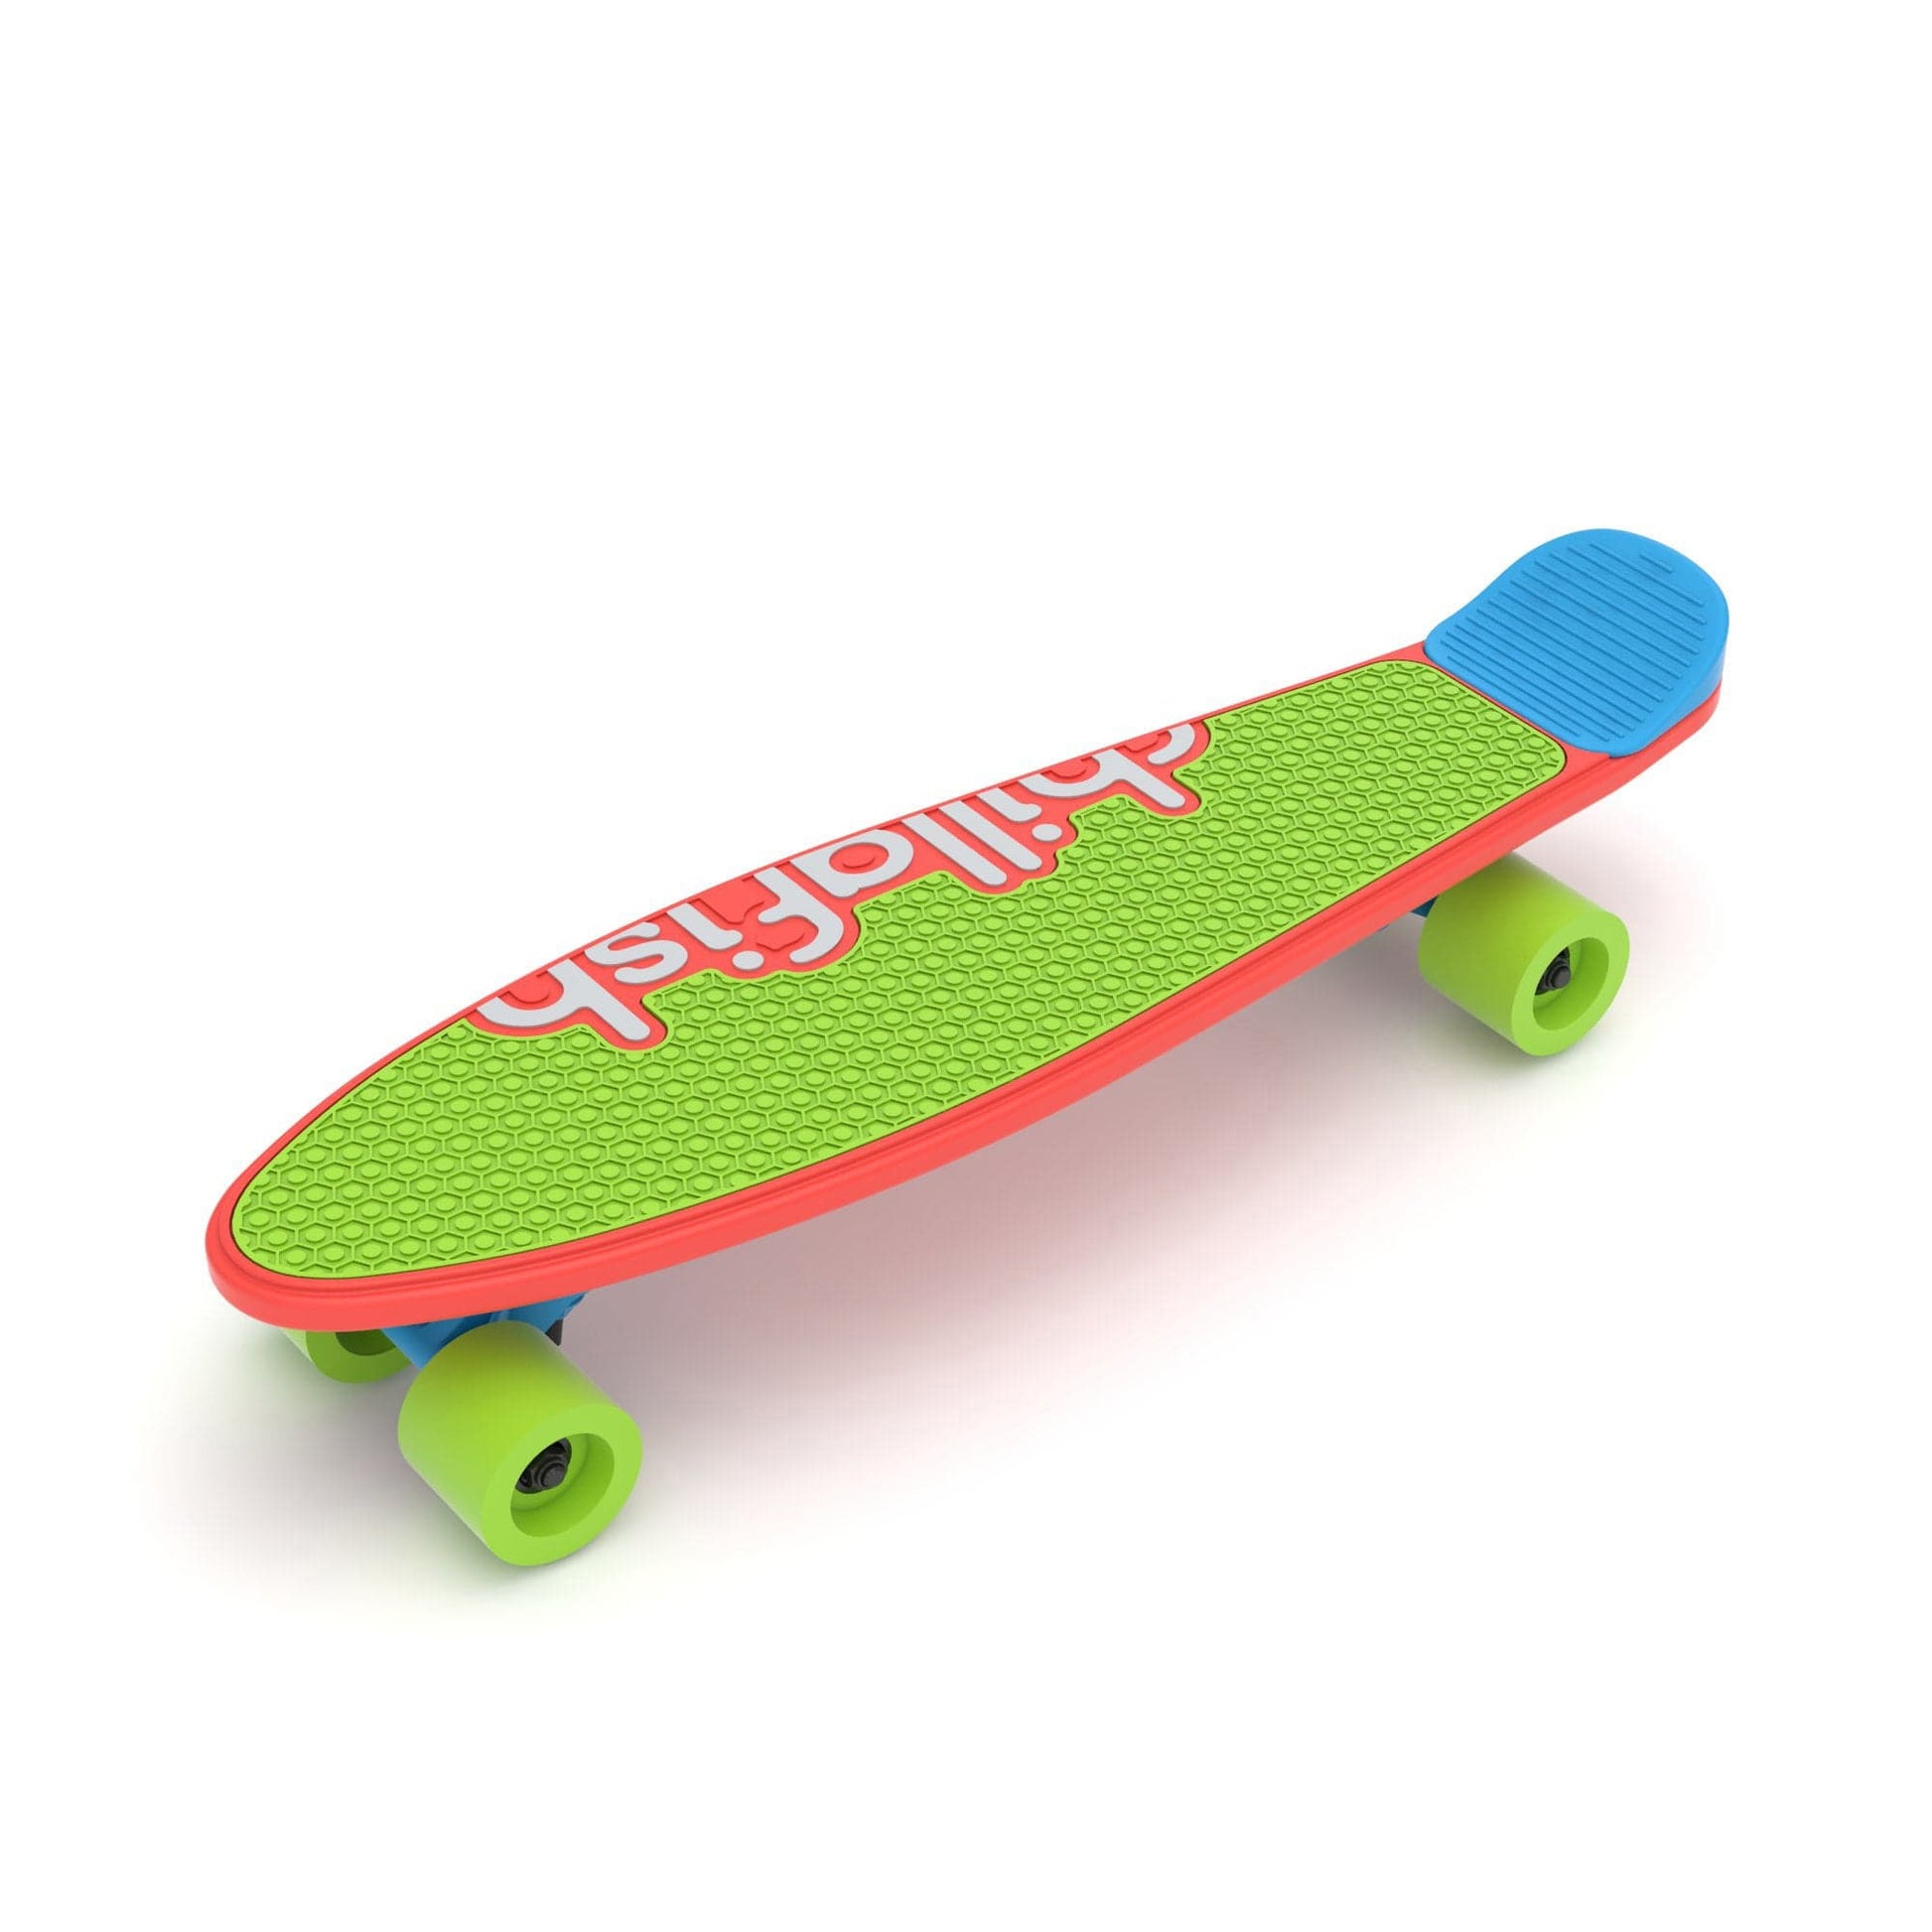 Chillafish Skatie Skateboard Red Mix Age 3+ - The Online Toy Shop2